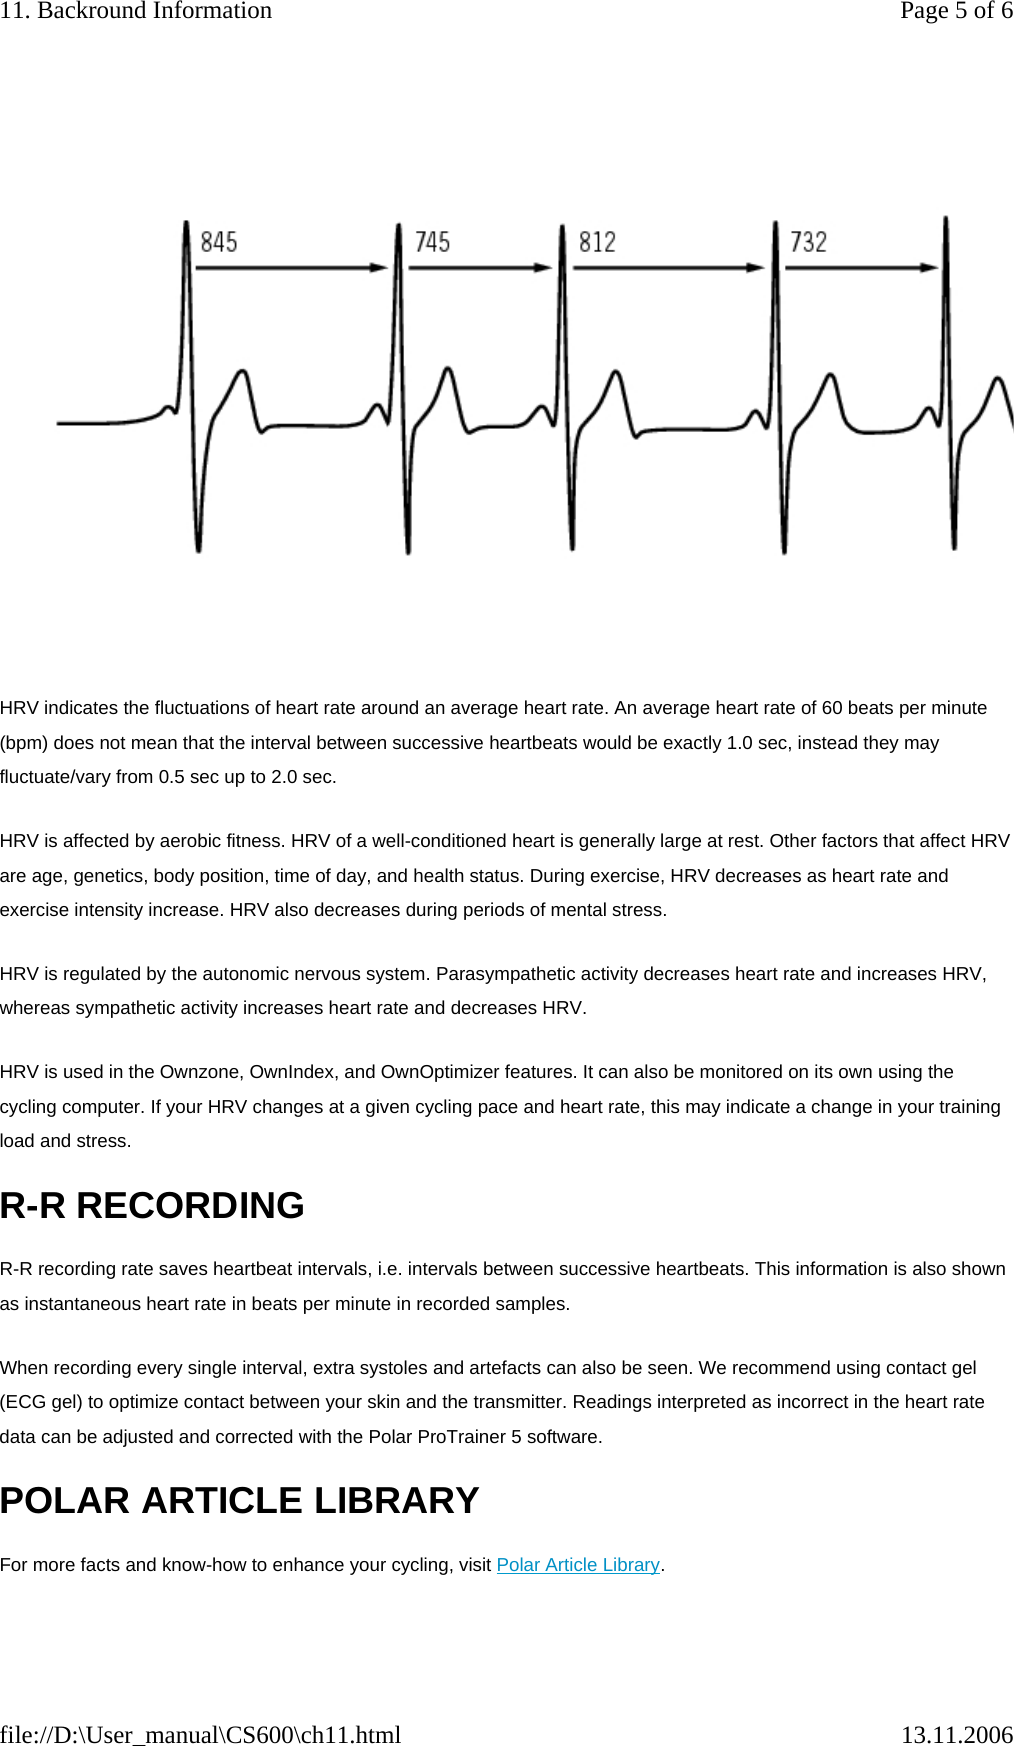 HRV indicates the fluctuations of heart rate around an average heart rate. An average heart rate of 60 beats per minute (bpm) does not mean that the interval between successive heartbeats would be exactly 1.0 sec, instead they may fluctuate/vary from 0.5 sec up to 2.0 sec. HRV is affected by aerobic fitness. HRV of a well-conditioned heart is generally large at rest. Other factors that affect HRV are age, genetics, body position, time of day, and health status. During exercise, HRV decreases as heart rate and exercise intensity increase. HRV also decreases during periods of mental stress. HRV is regulated by the autonomic nervous system. Parasympathetic activity decreases heart rate and increases HRV, whereas sympathetic activity increases heart rate and decreases HRV. HRV is used in the Ownzone, OwnIndex, and OwnOptimizer features. It can also be monitored on its own using the cycling computer. If your HRV changes at a given cycling pace and heart rate, this may indicate a change in your training load and stress.  R-R RECORDING R-R recording rate saves heartbeat intervals, i.e. intervals between successive heartbeats. This information is also shown as instantaneous heart rate in beats per minute in recorded samples.  When recording every single interval, extra systoles and artefacts can also be seen. We recommend using contact gel (ECG gel) to optimize contact between your skin and the transmitter. Readings interpreted as incorrect in the heart rate data can be adjusted and corrected with the Polar ProTrainer 5 software. POLAR ARTICLE LIBRARY For more facts and know-how to enhance your cycling, visit Polar Article Library. Page 5 of 611. Backround Information13.11.2006file://D:\User_manual\CS600\ch11.html